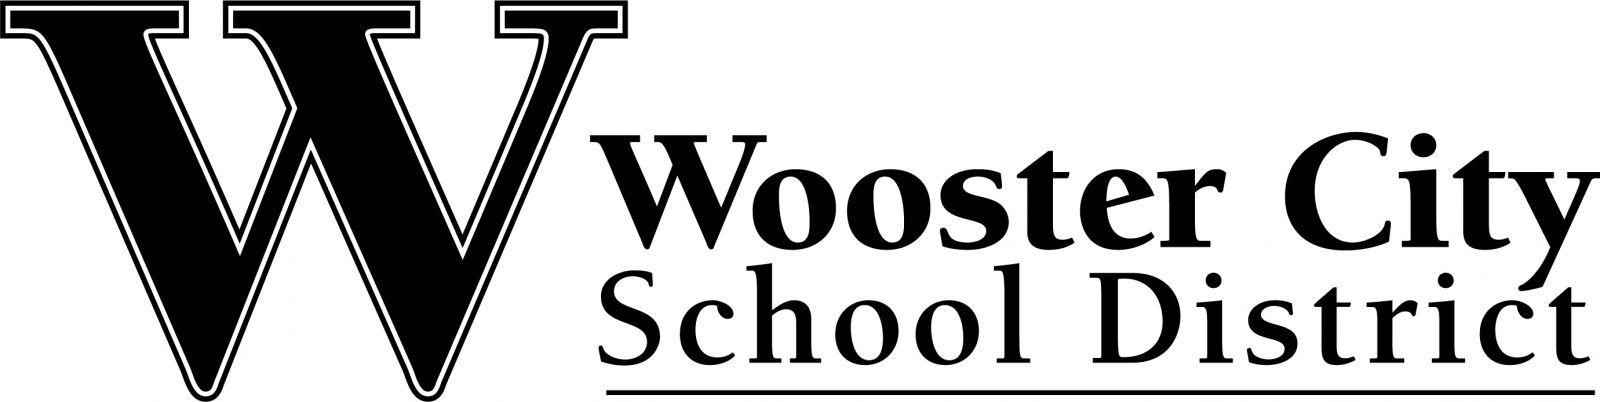 Black and White No Brand Logo - Our Brand. Wooster City Schools